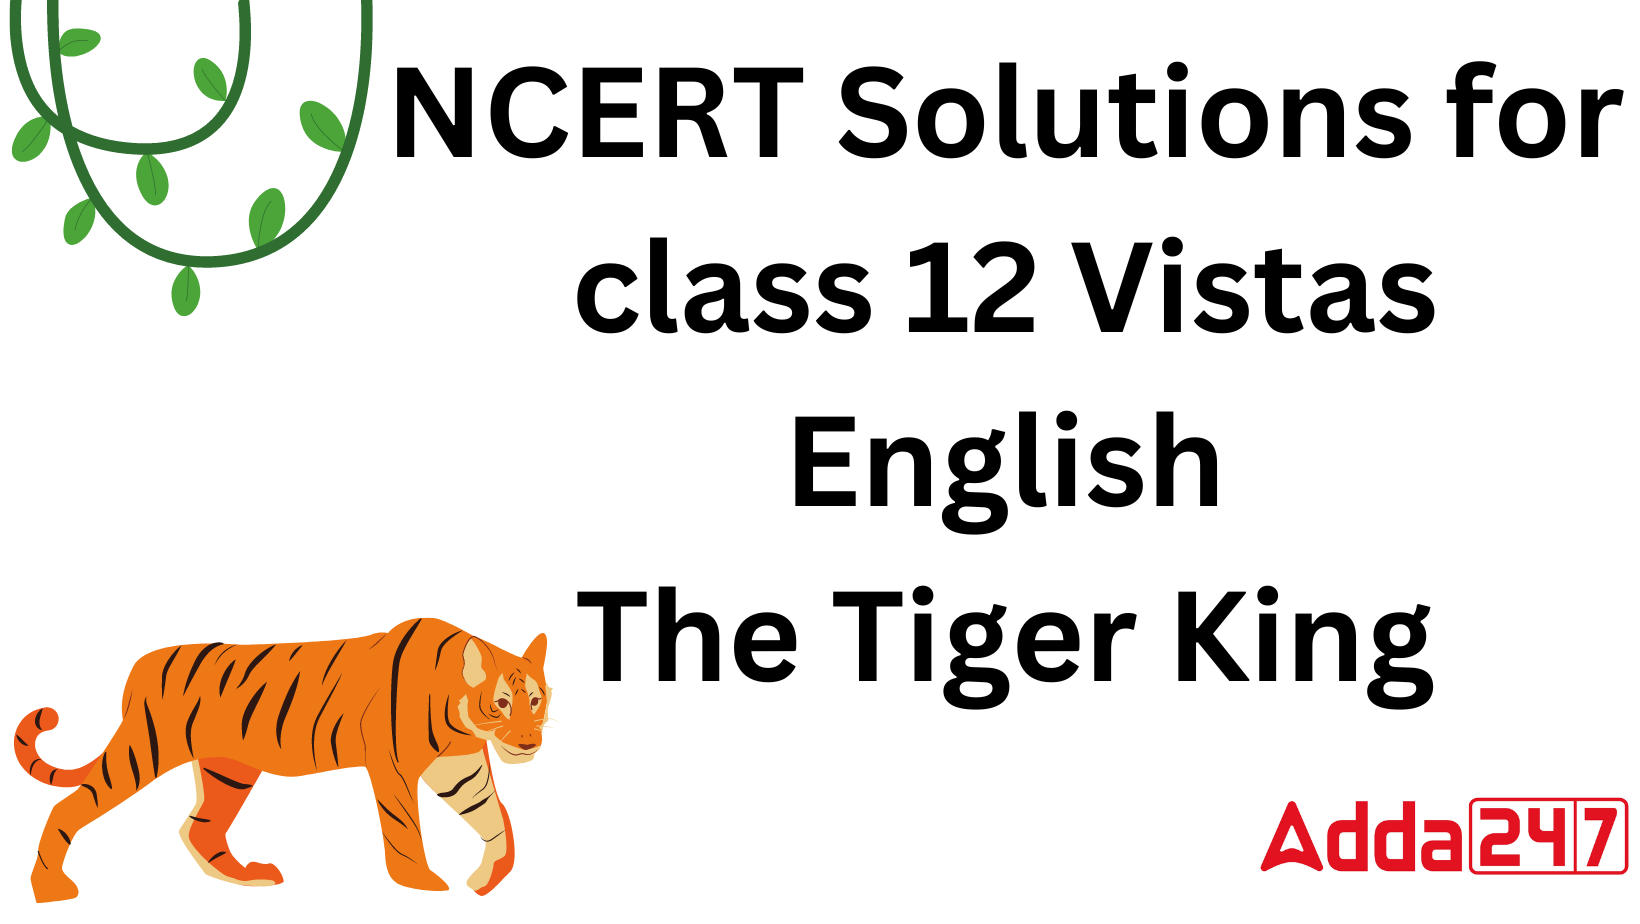 NCERT Solutions for class 12 Vistas English The Tiger King